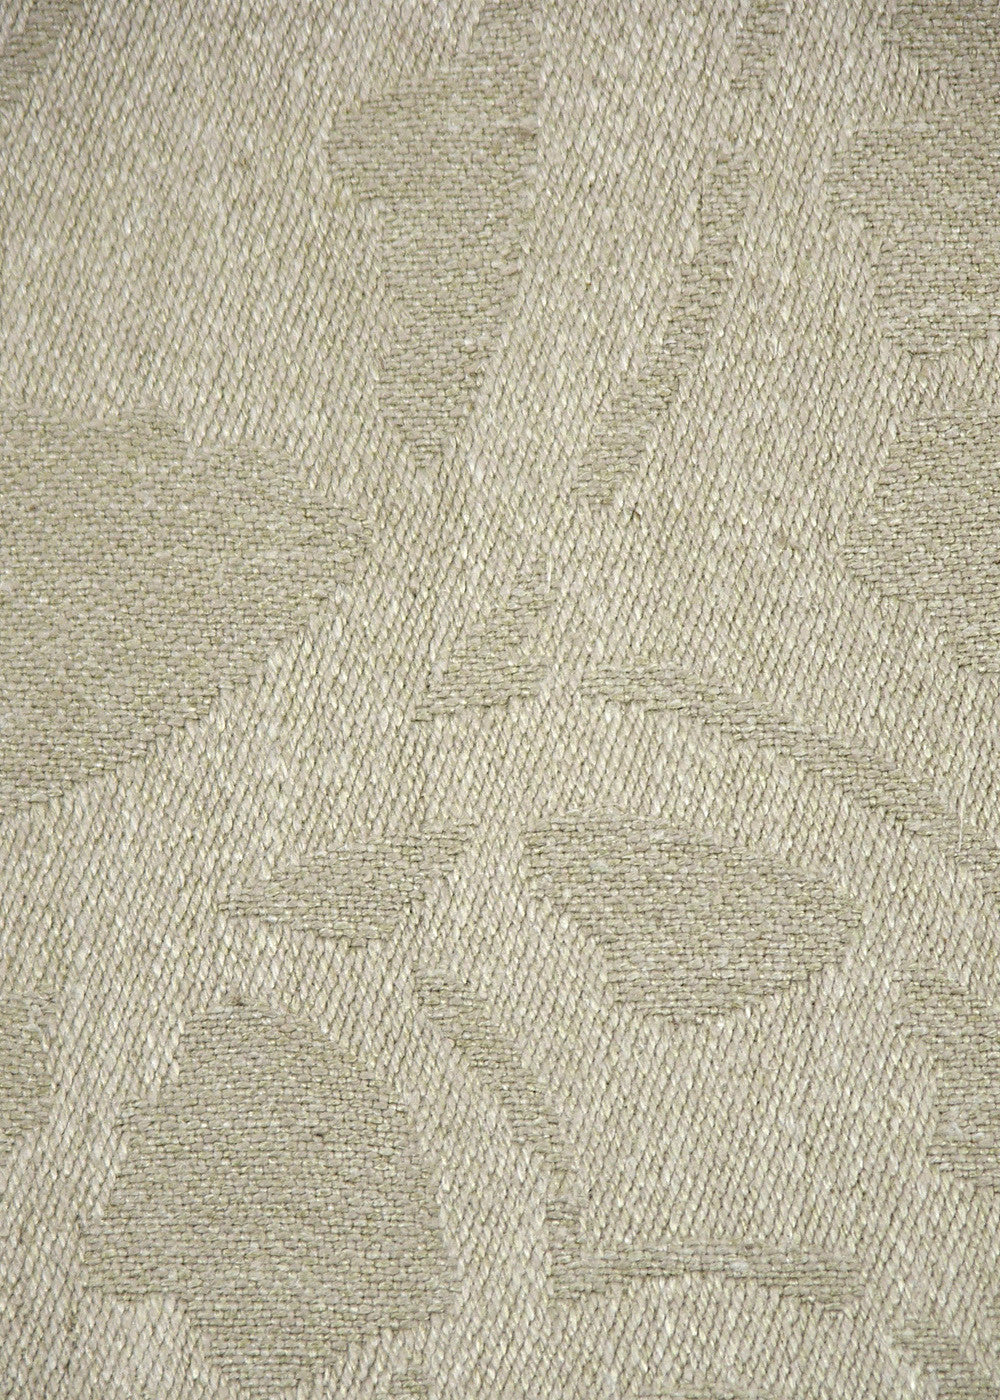 taupe fabric with a woven large-scale damask pattern